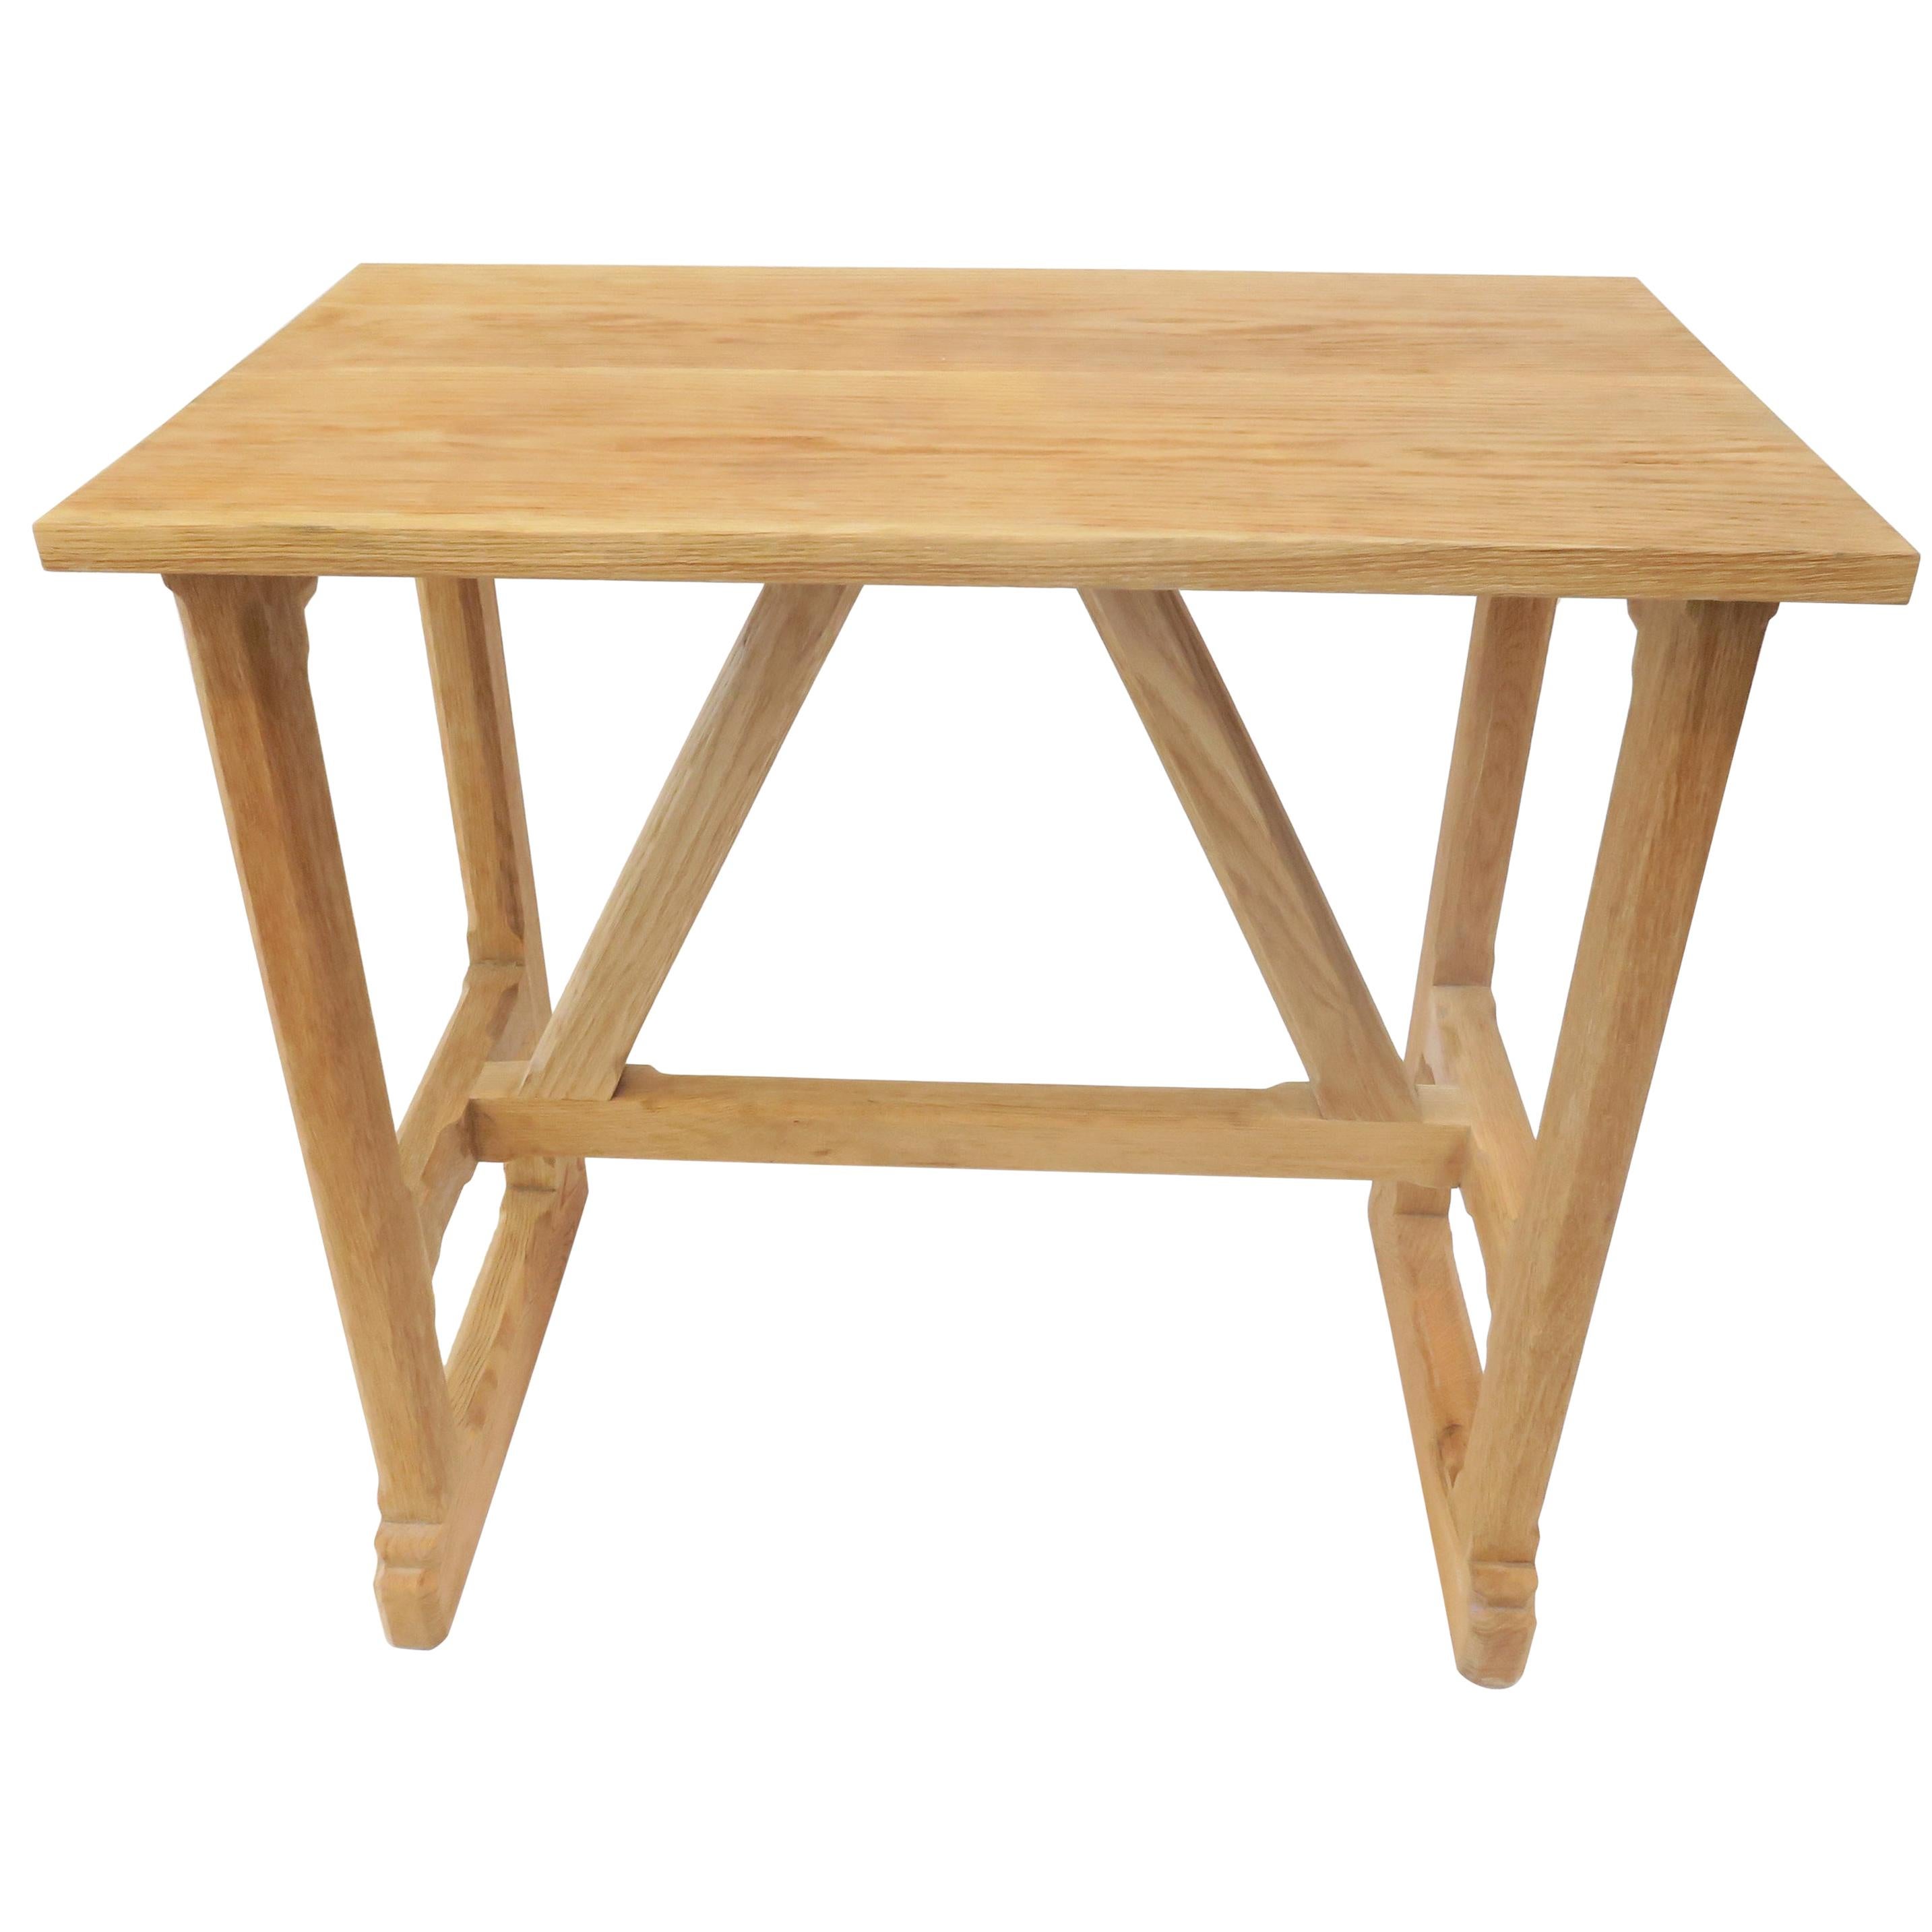 Martin & Brockett's West Trestle Side Table features a rustic, craftsman style sinewy frame with handcarved details.

H 30.5 in. x W 31.25 in. x D 18 in.

Part of our West Trestle Collection.

Available for order in additional finishes and